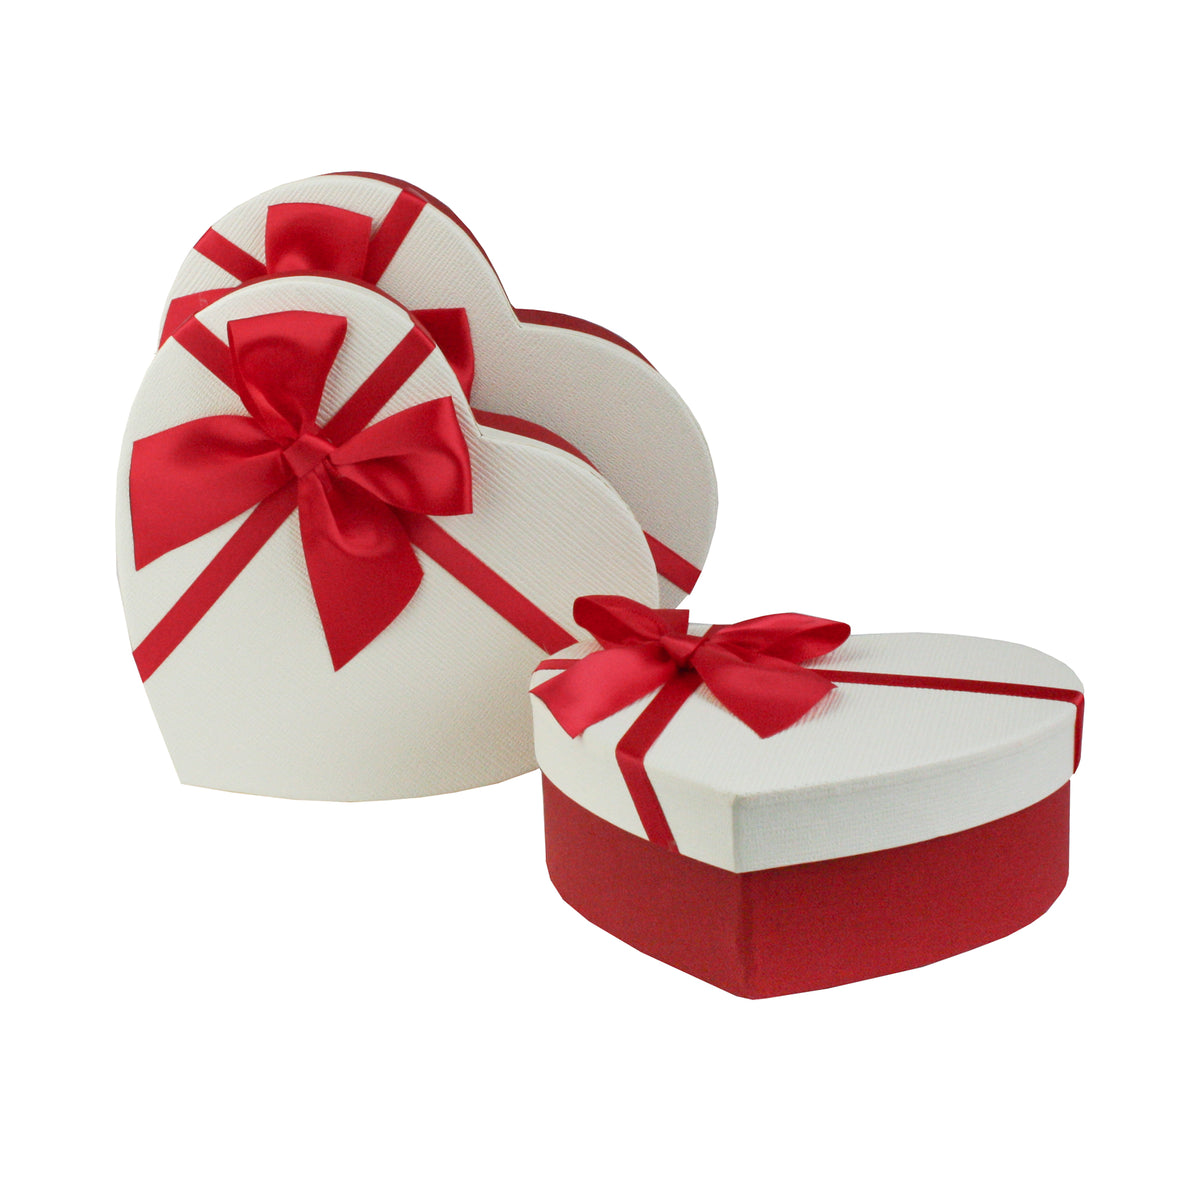 Set of 3 Red/White Gift Boxes with Red Satin Ribbon